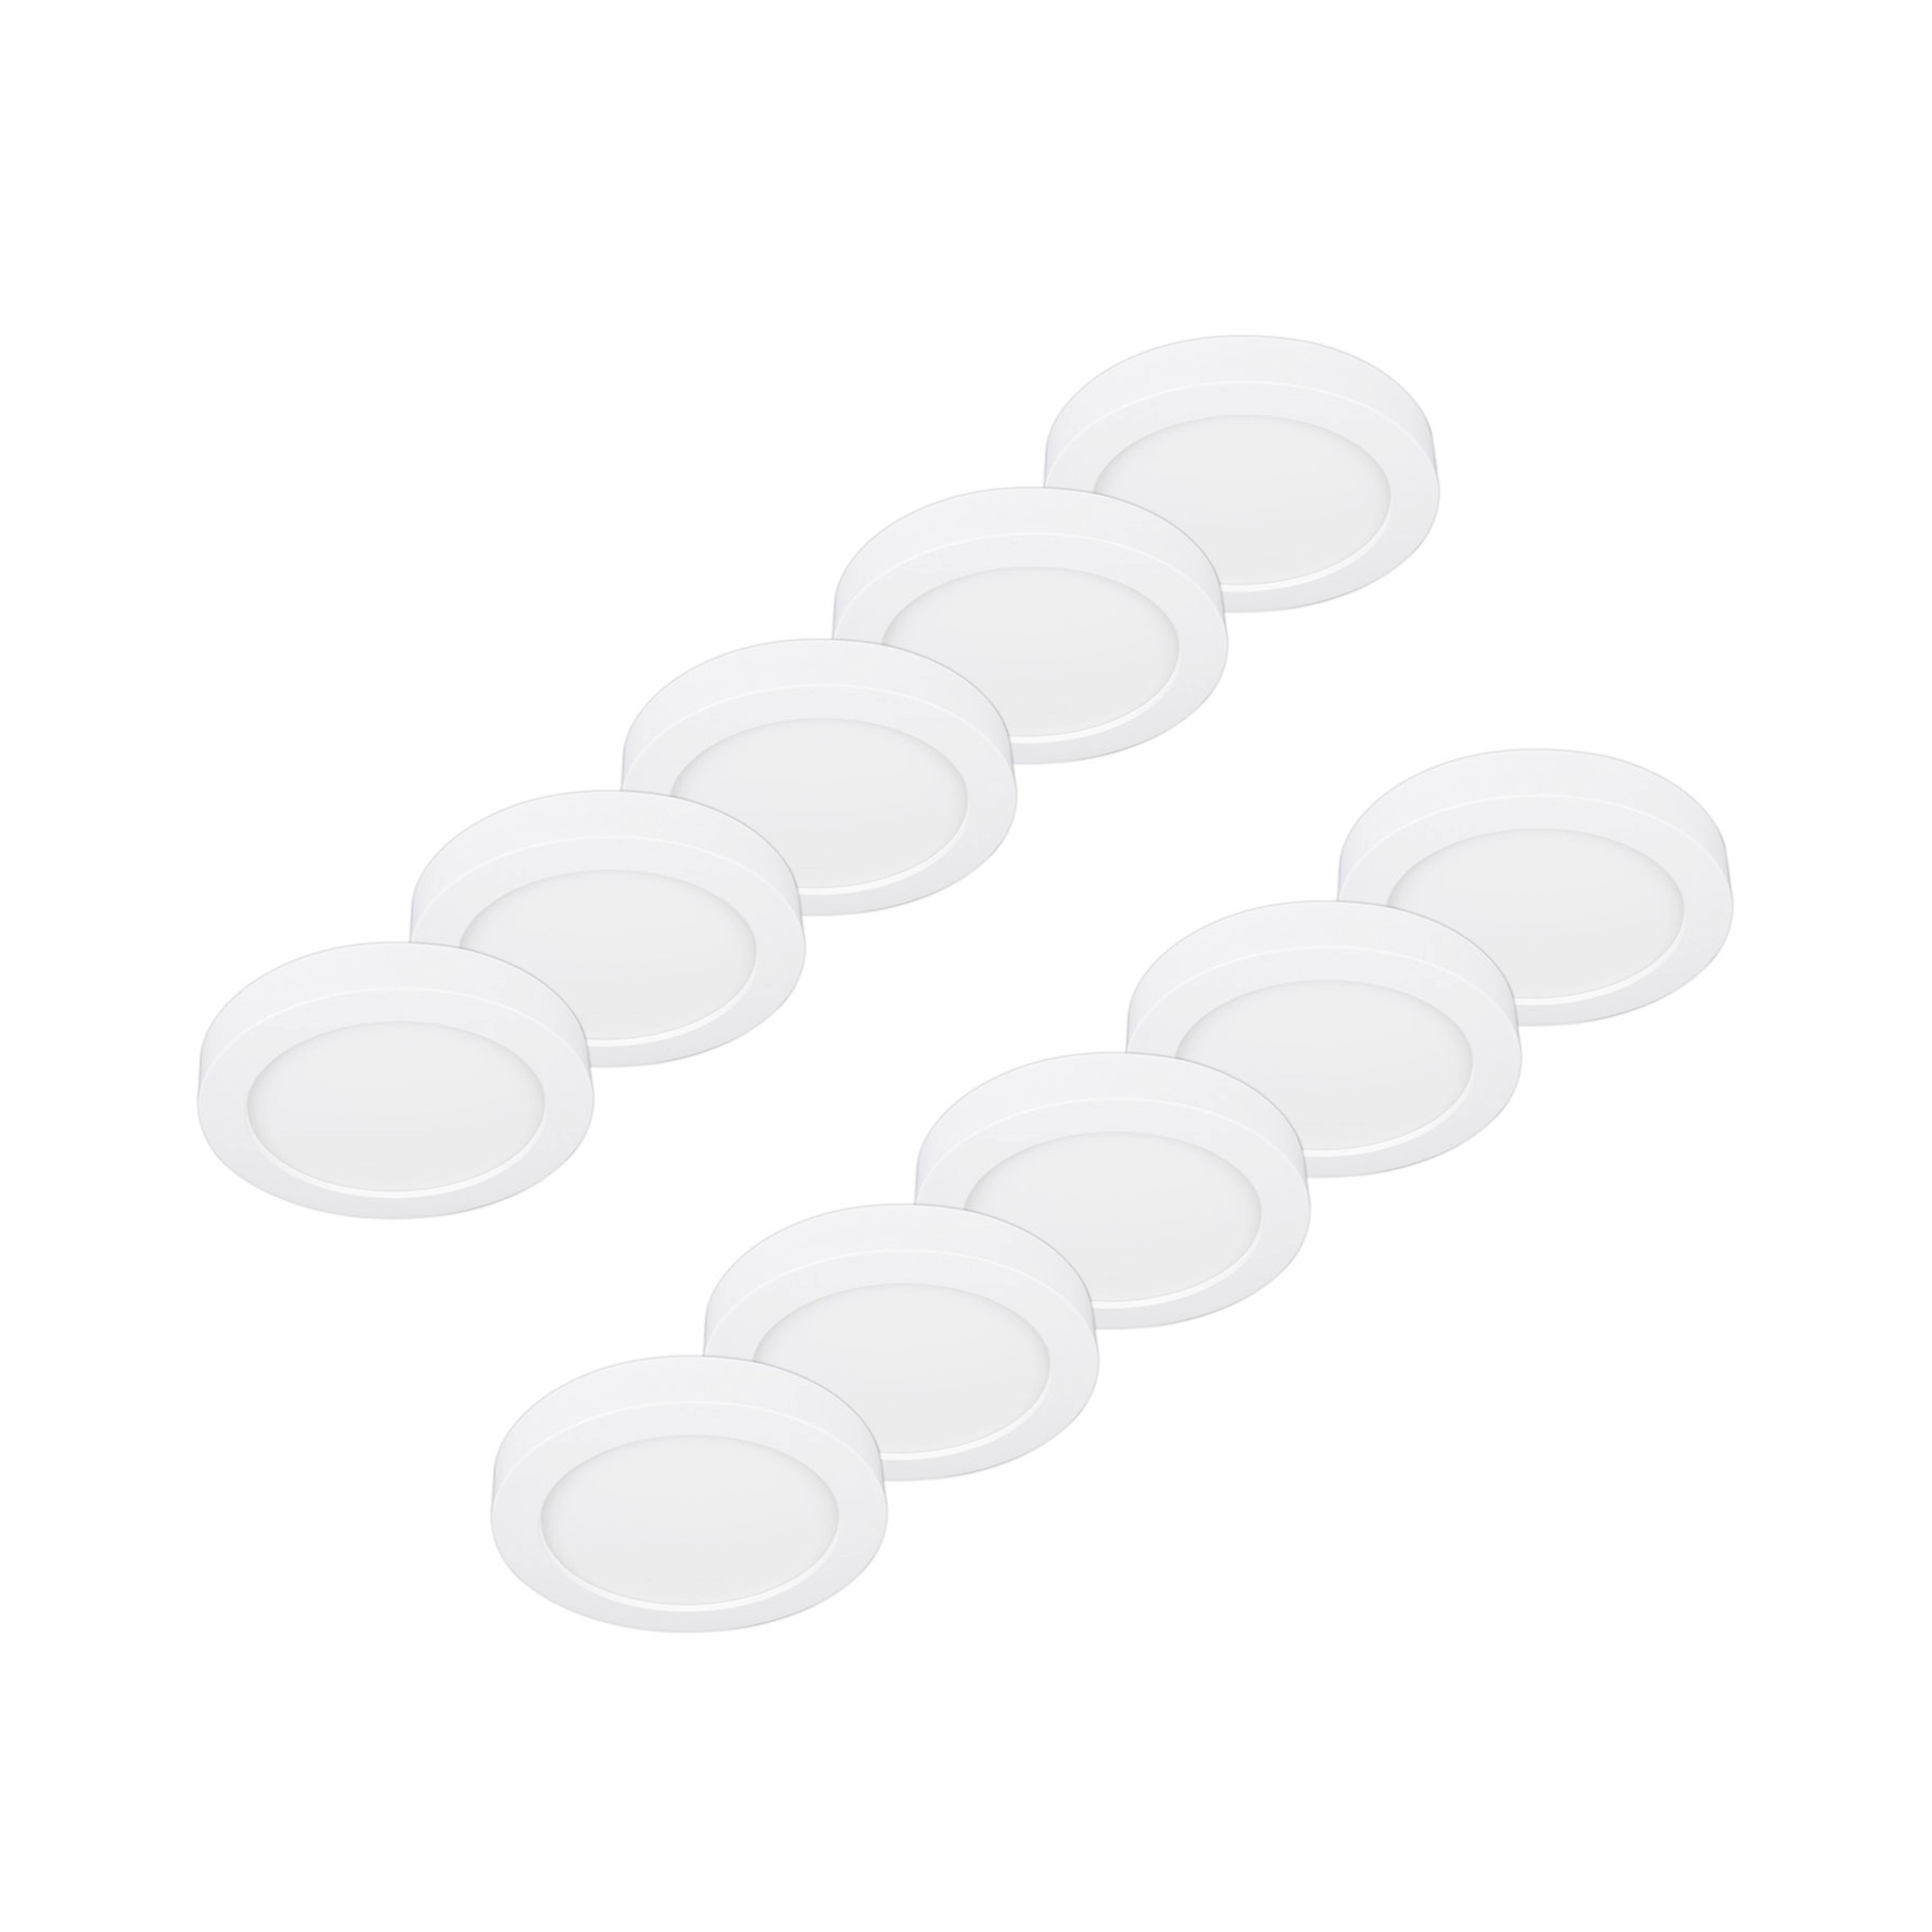 Prios LED ceiling lamp Edwina, white, 17.7cm, 10pcs, dimmable